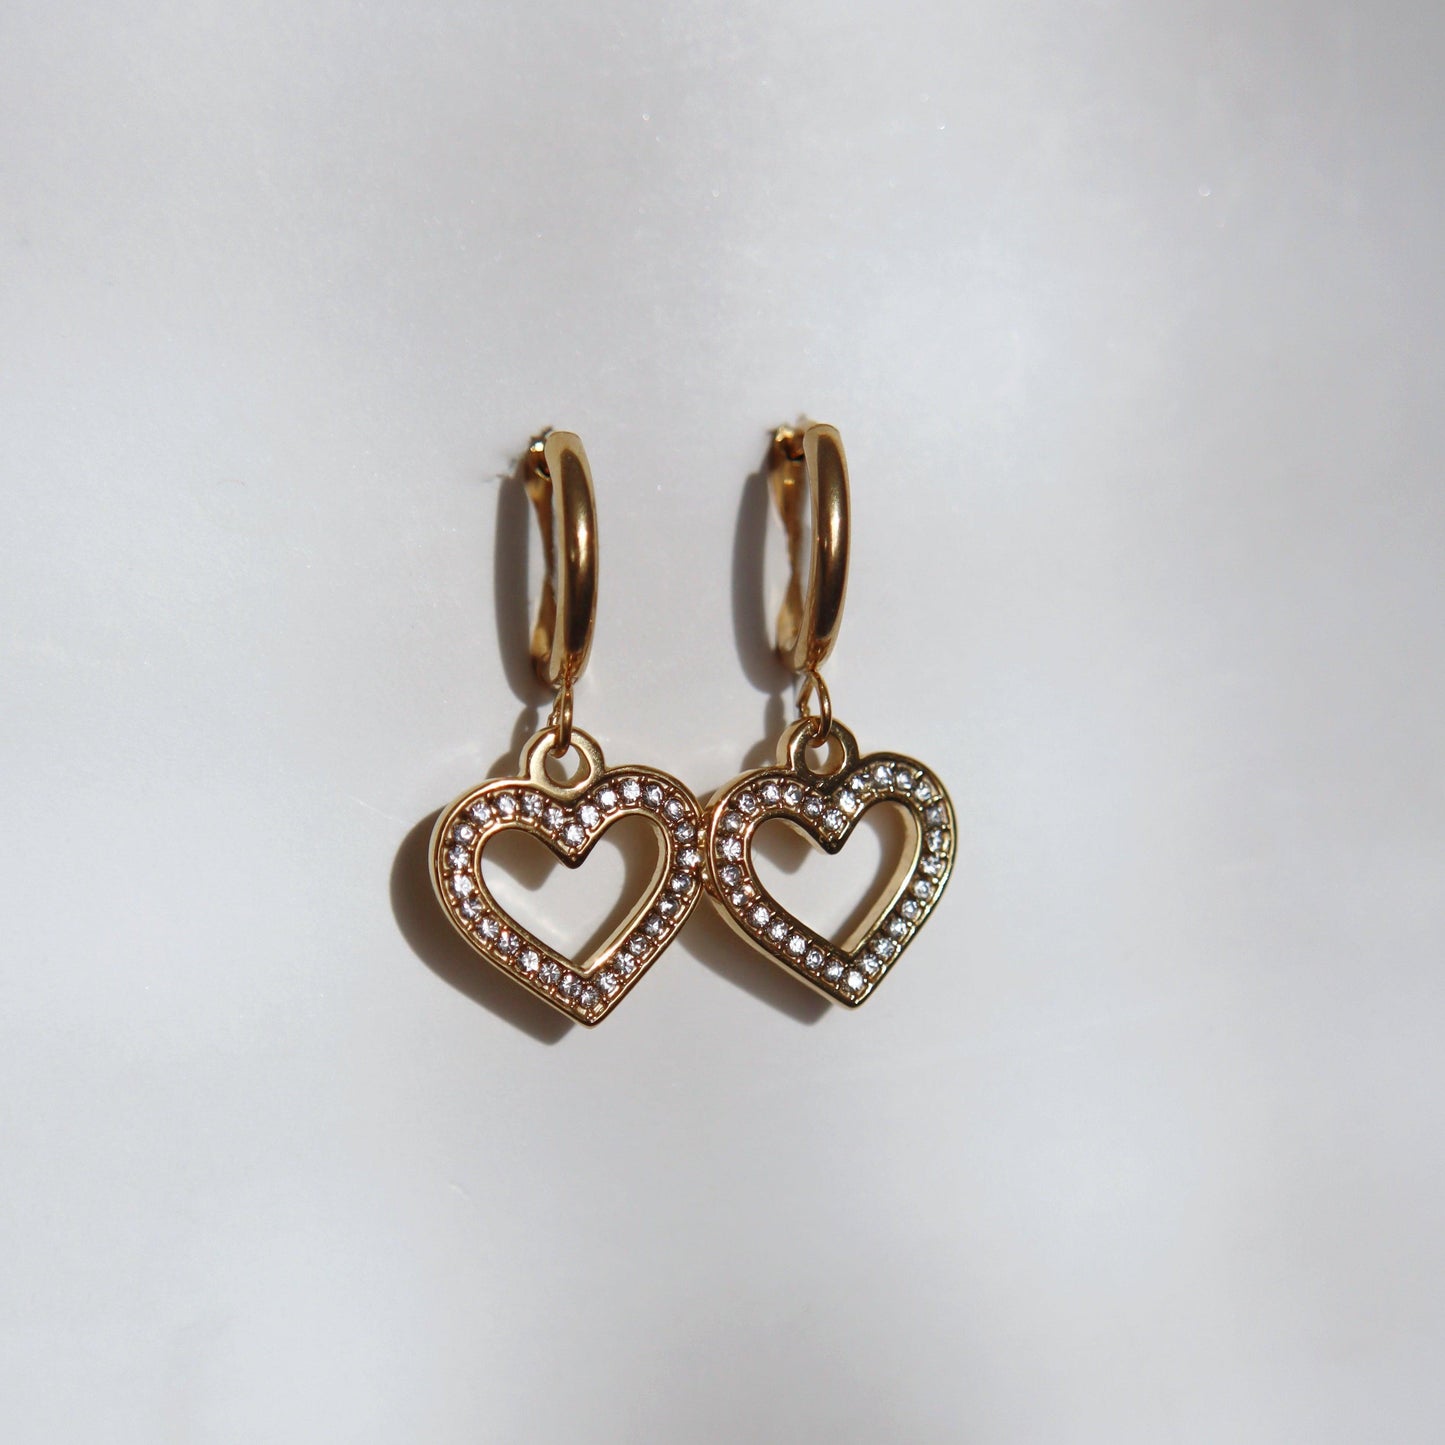 Studded Heart Huggies - JESSA JEWELRY | GOLD JEWELRY; dainty, affordable gold everyday jewelry. Tarnish free, water-resistant, hypoallergenic. Jewelry for everyday wear